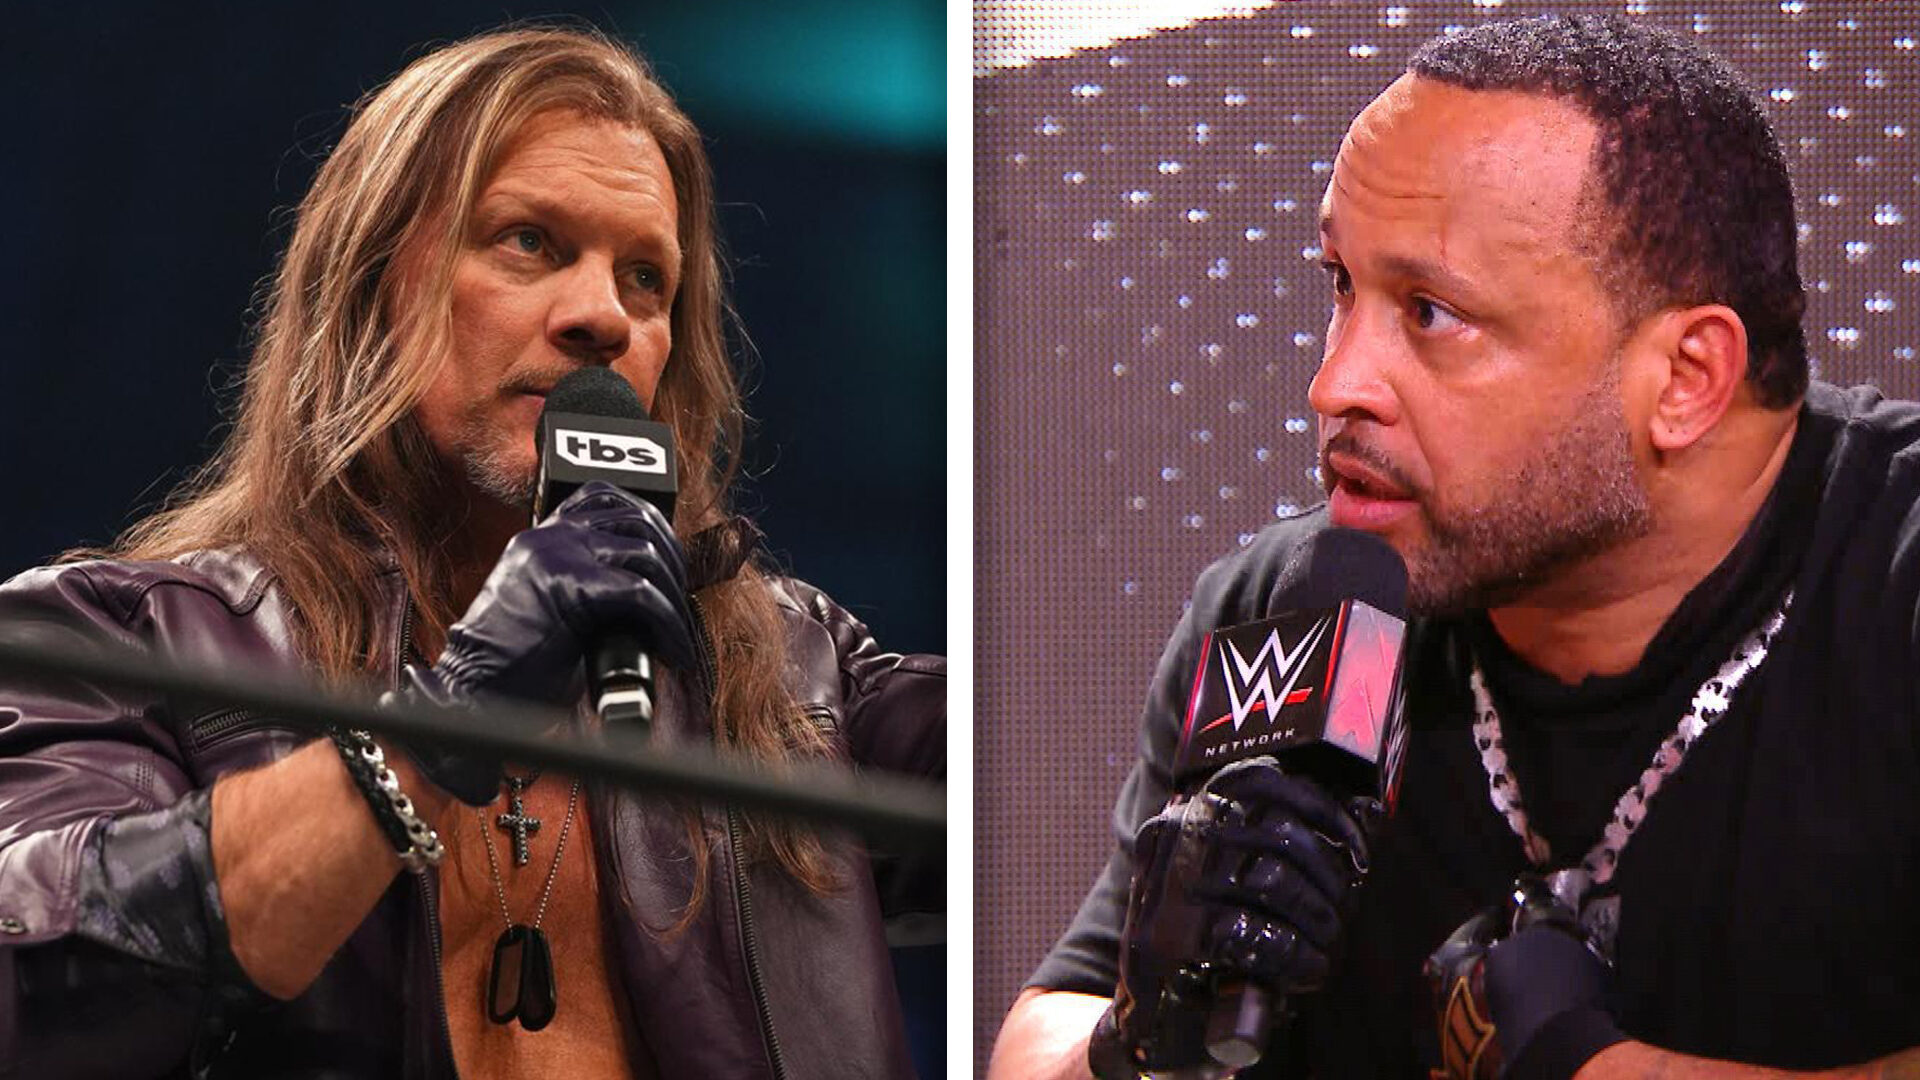 Update On Chris Jericho and MVP Hotel Confrontation